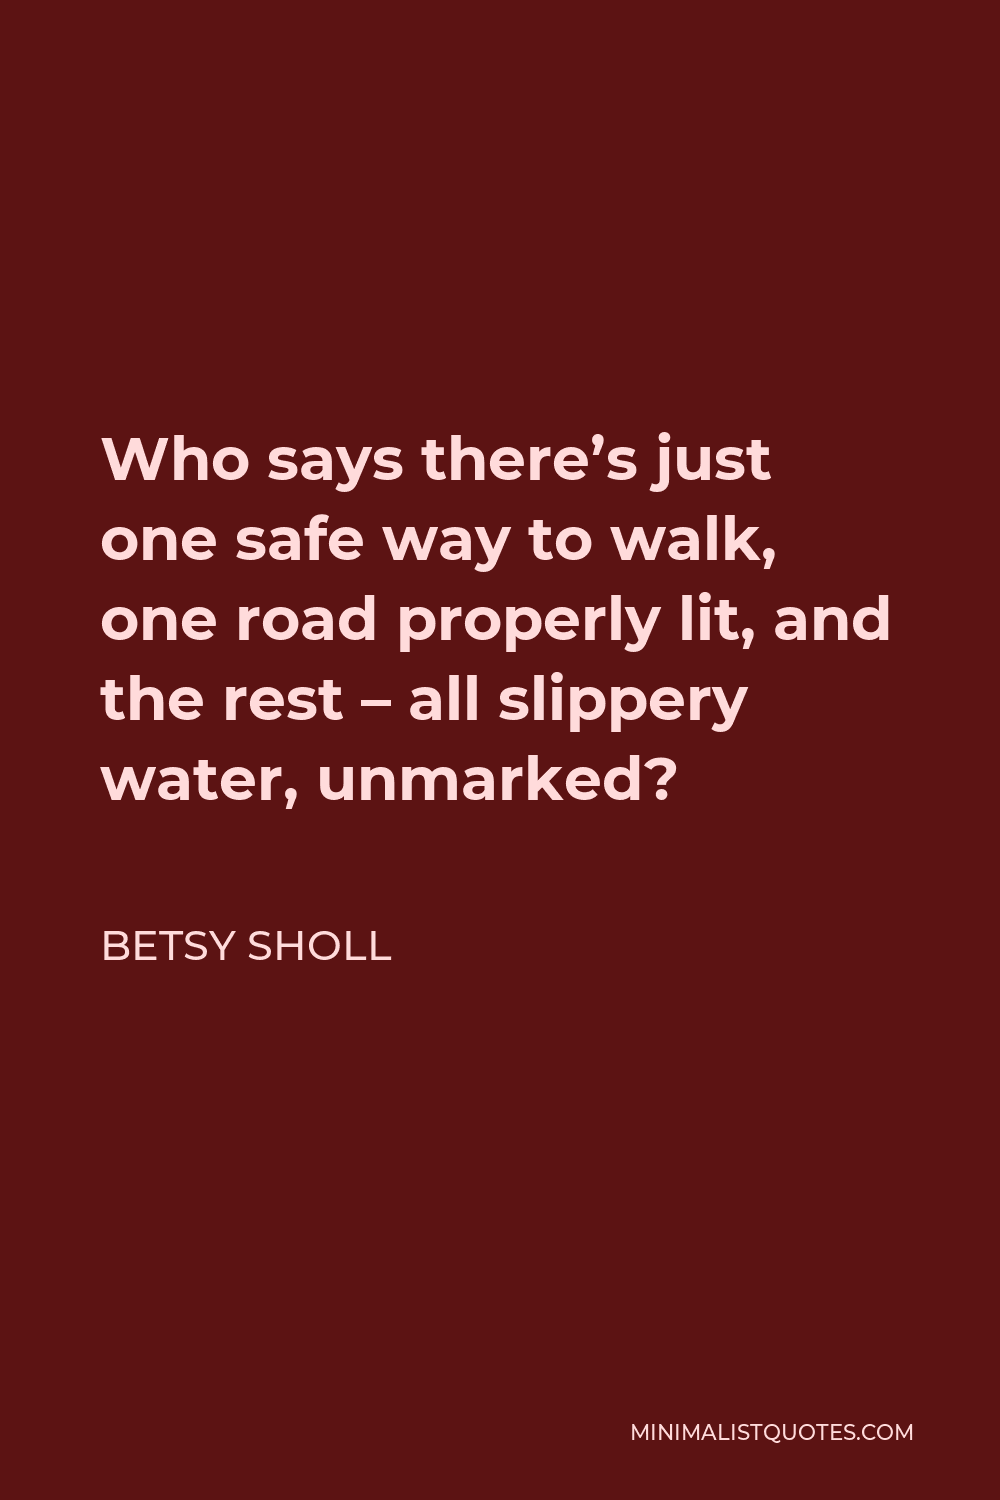 Betsy Sholl Quote - Who says there’s just one safe way to walk, one road properly lit, and the rest – all slippery water, unmarked?